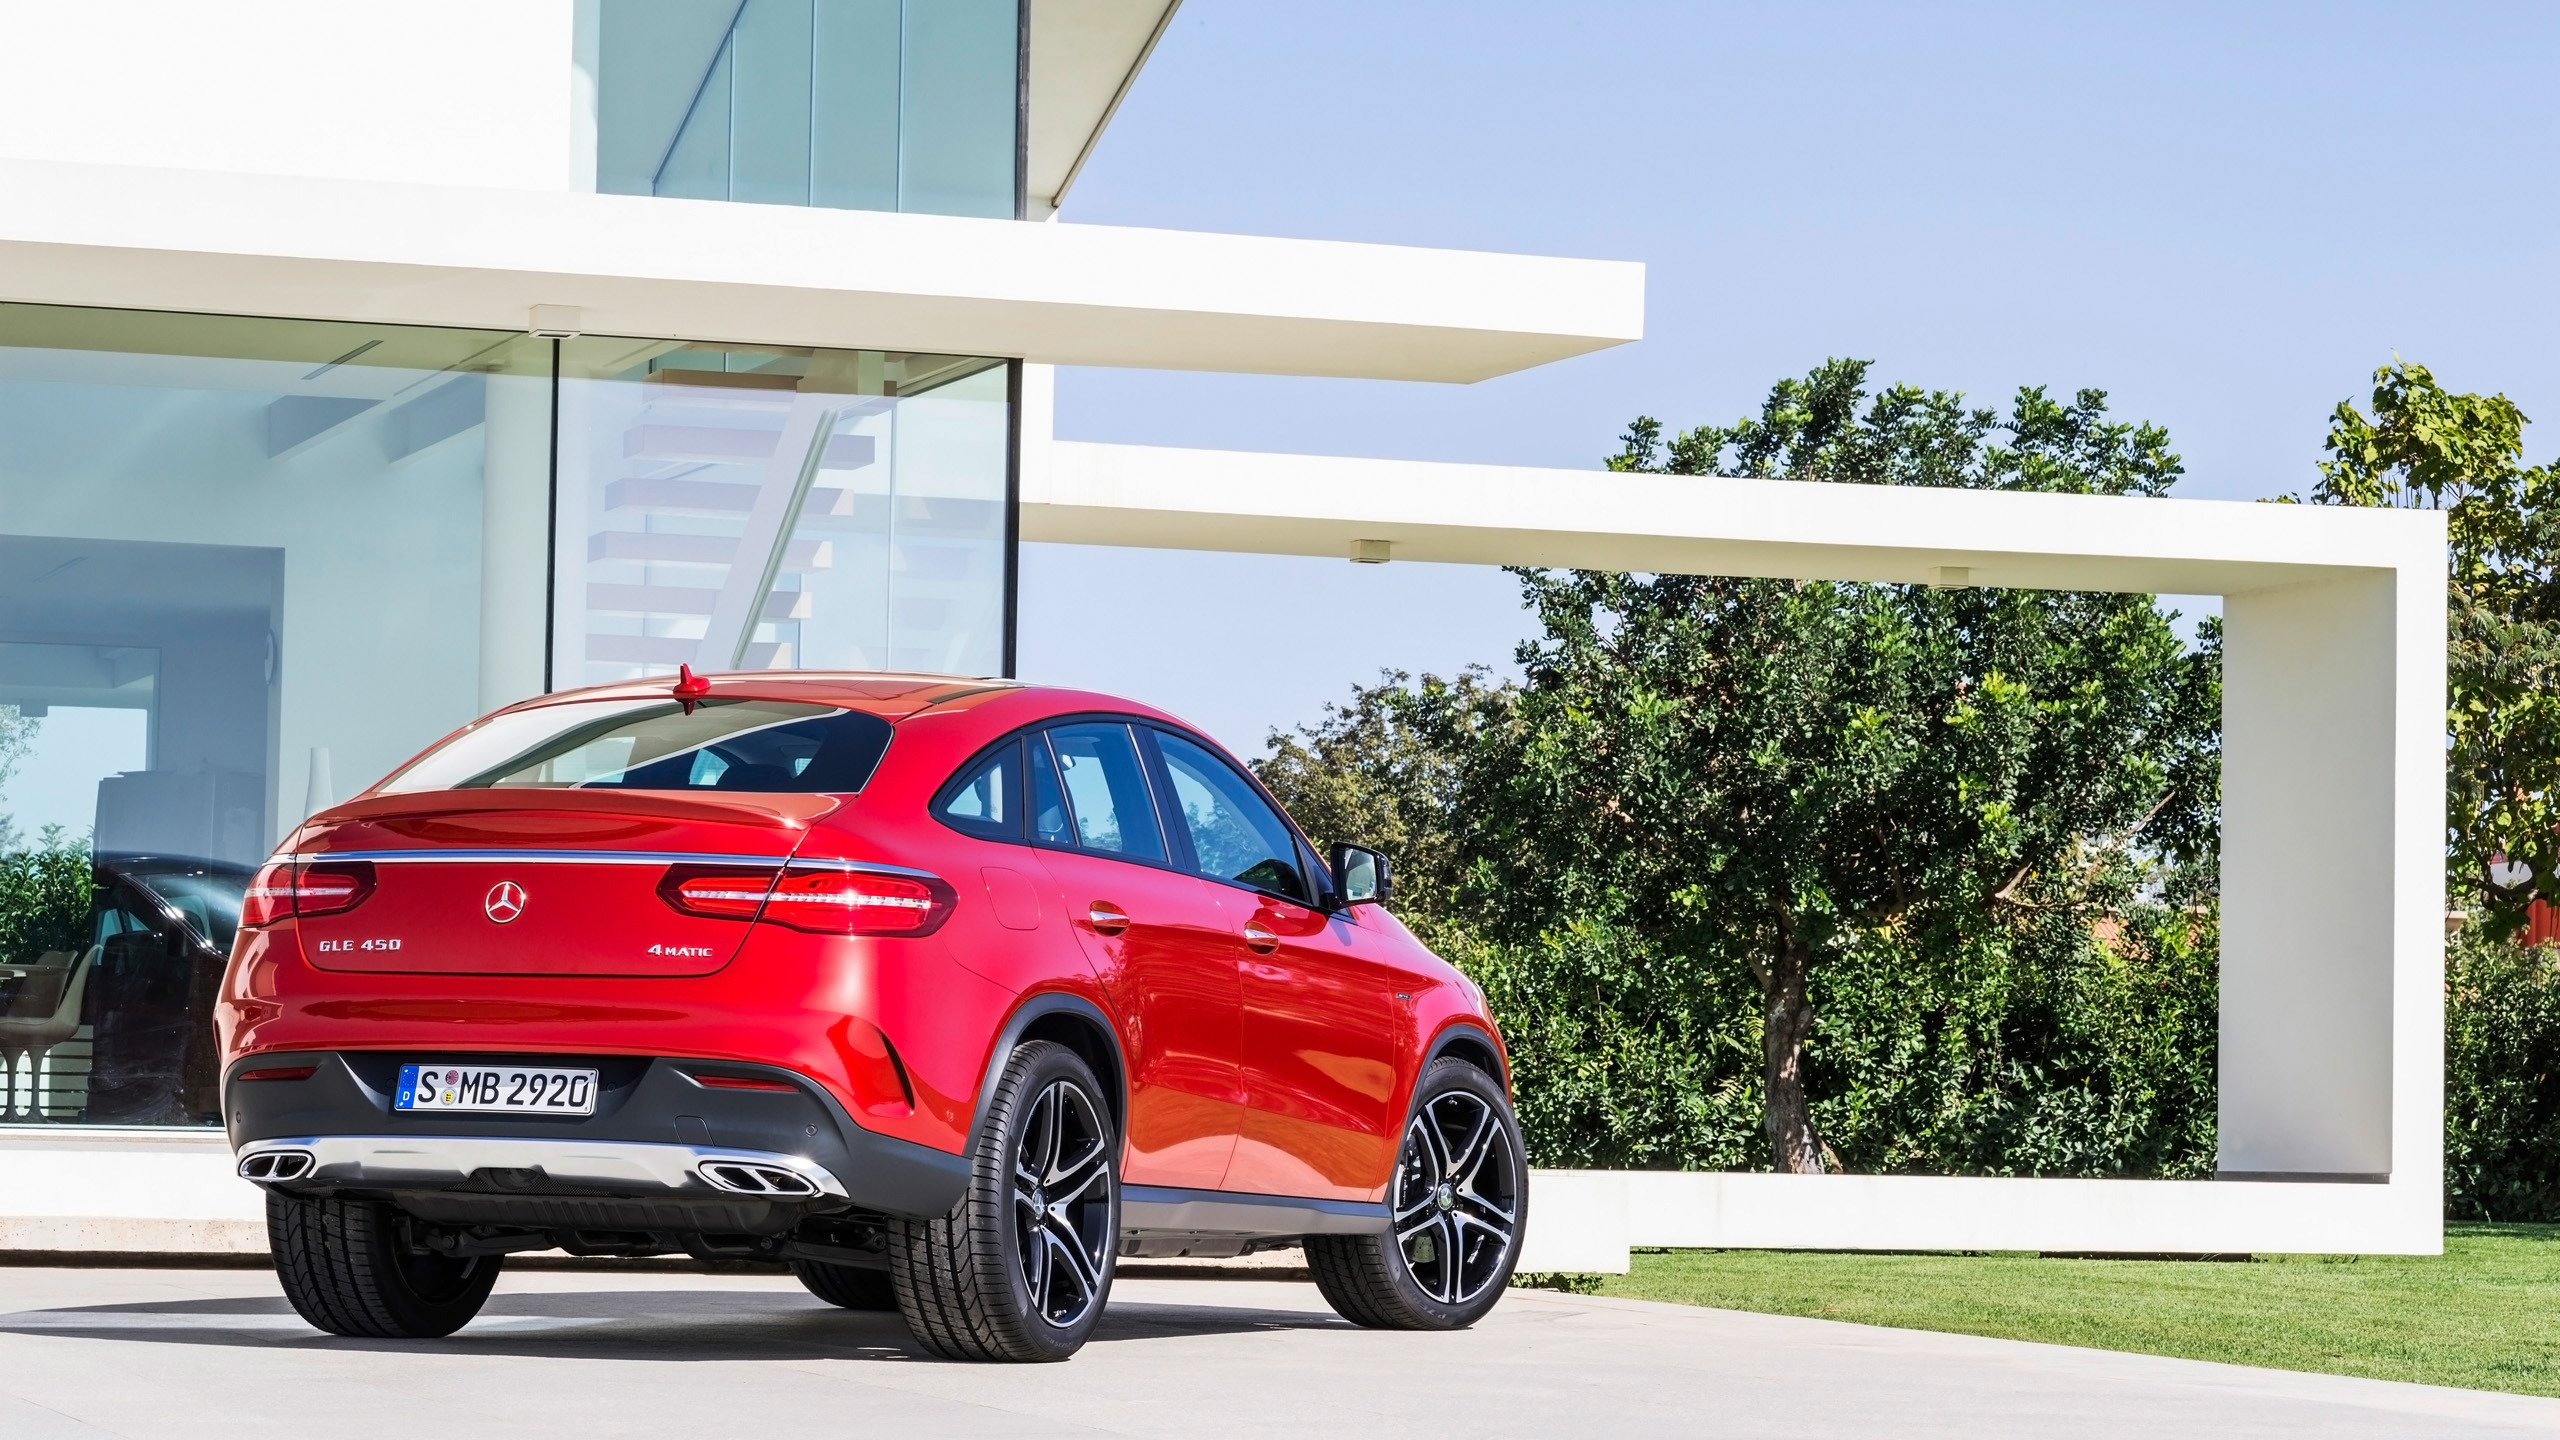 Mercedes Benz GLE Coupe Back View for 2560x1440 HDTV resolution